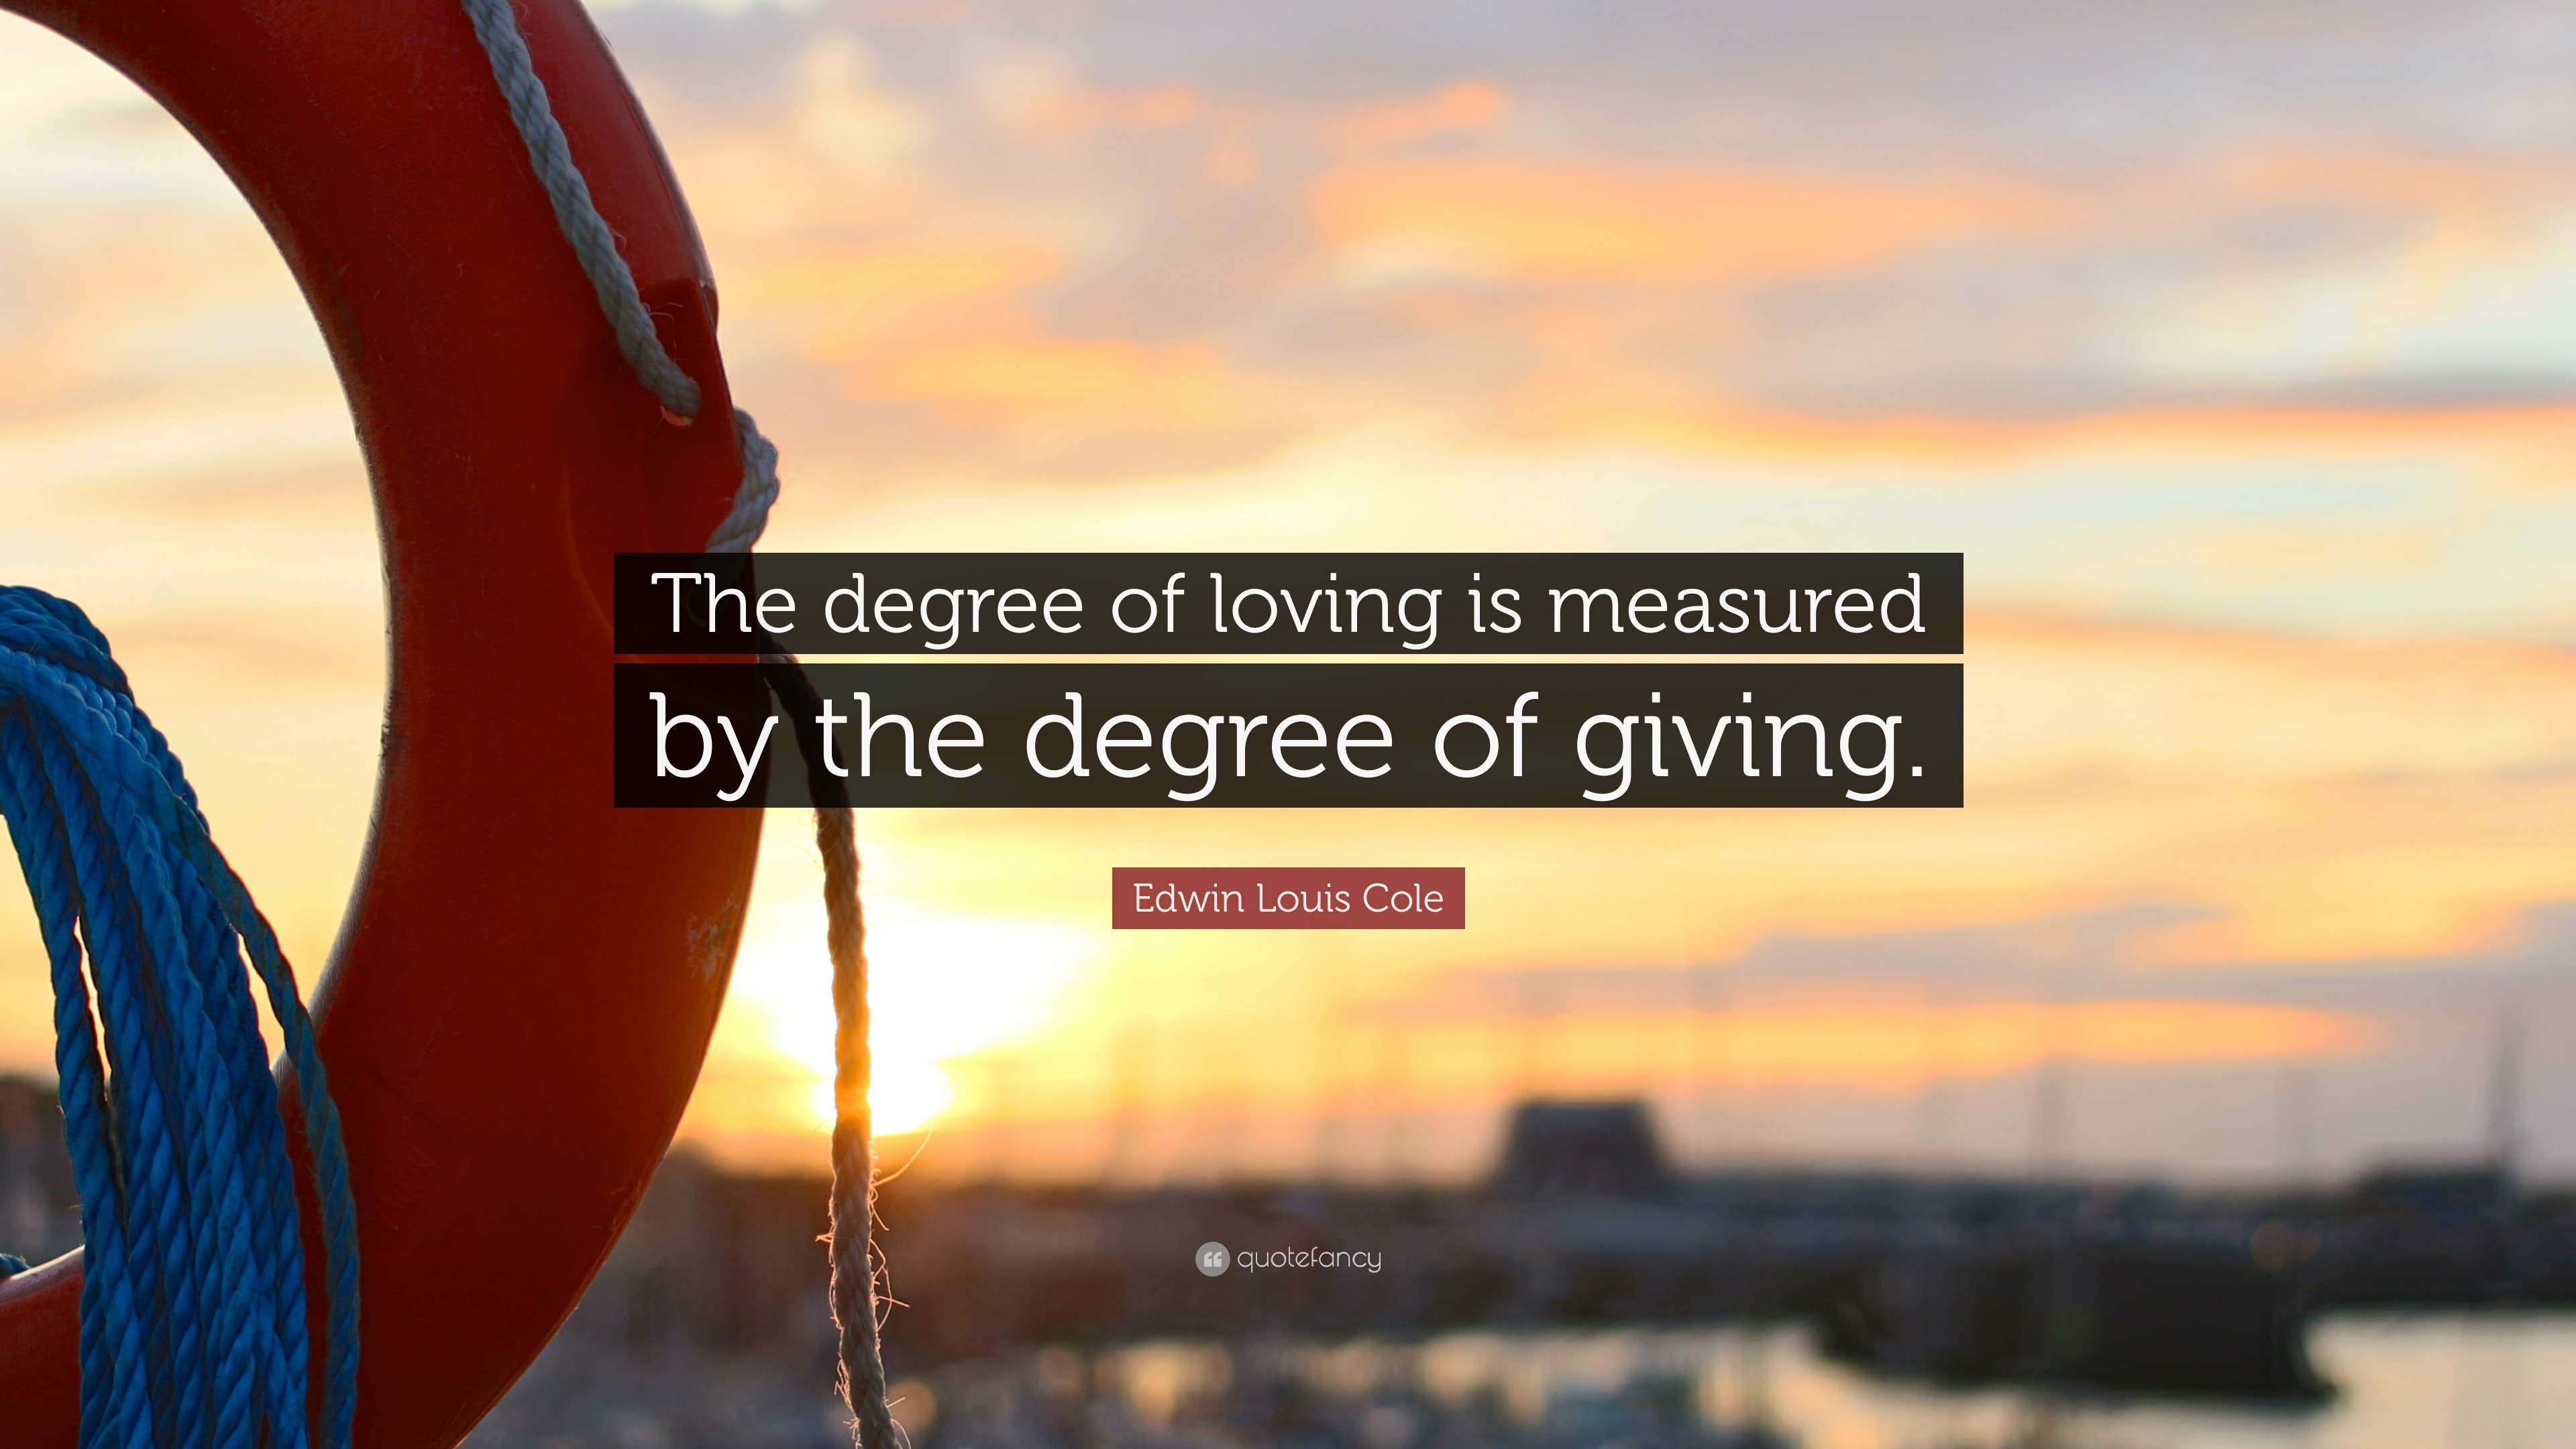 Edwin Louis Cole - The degree of loving is measured by the